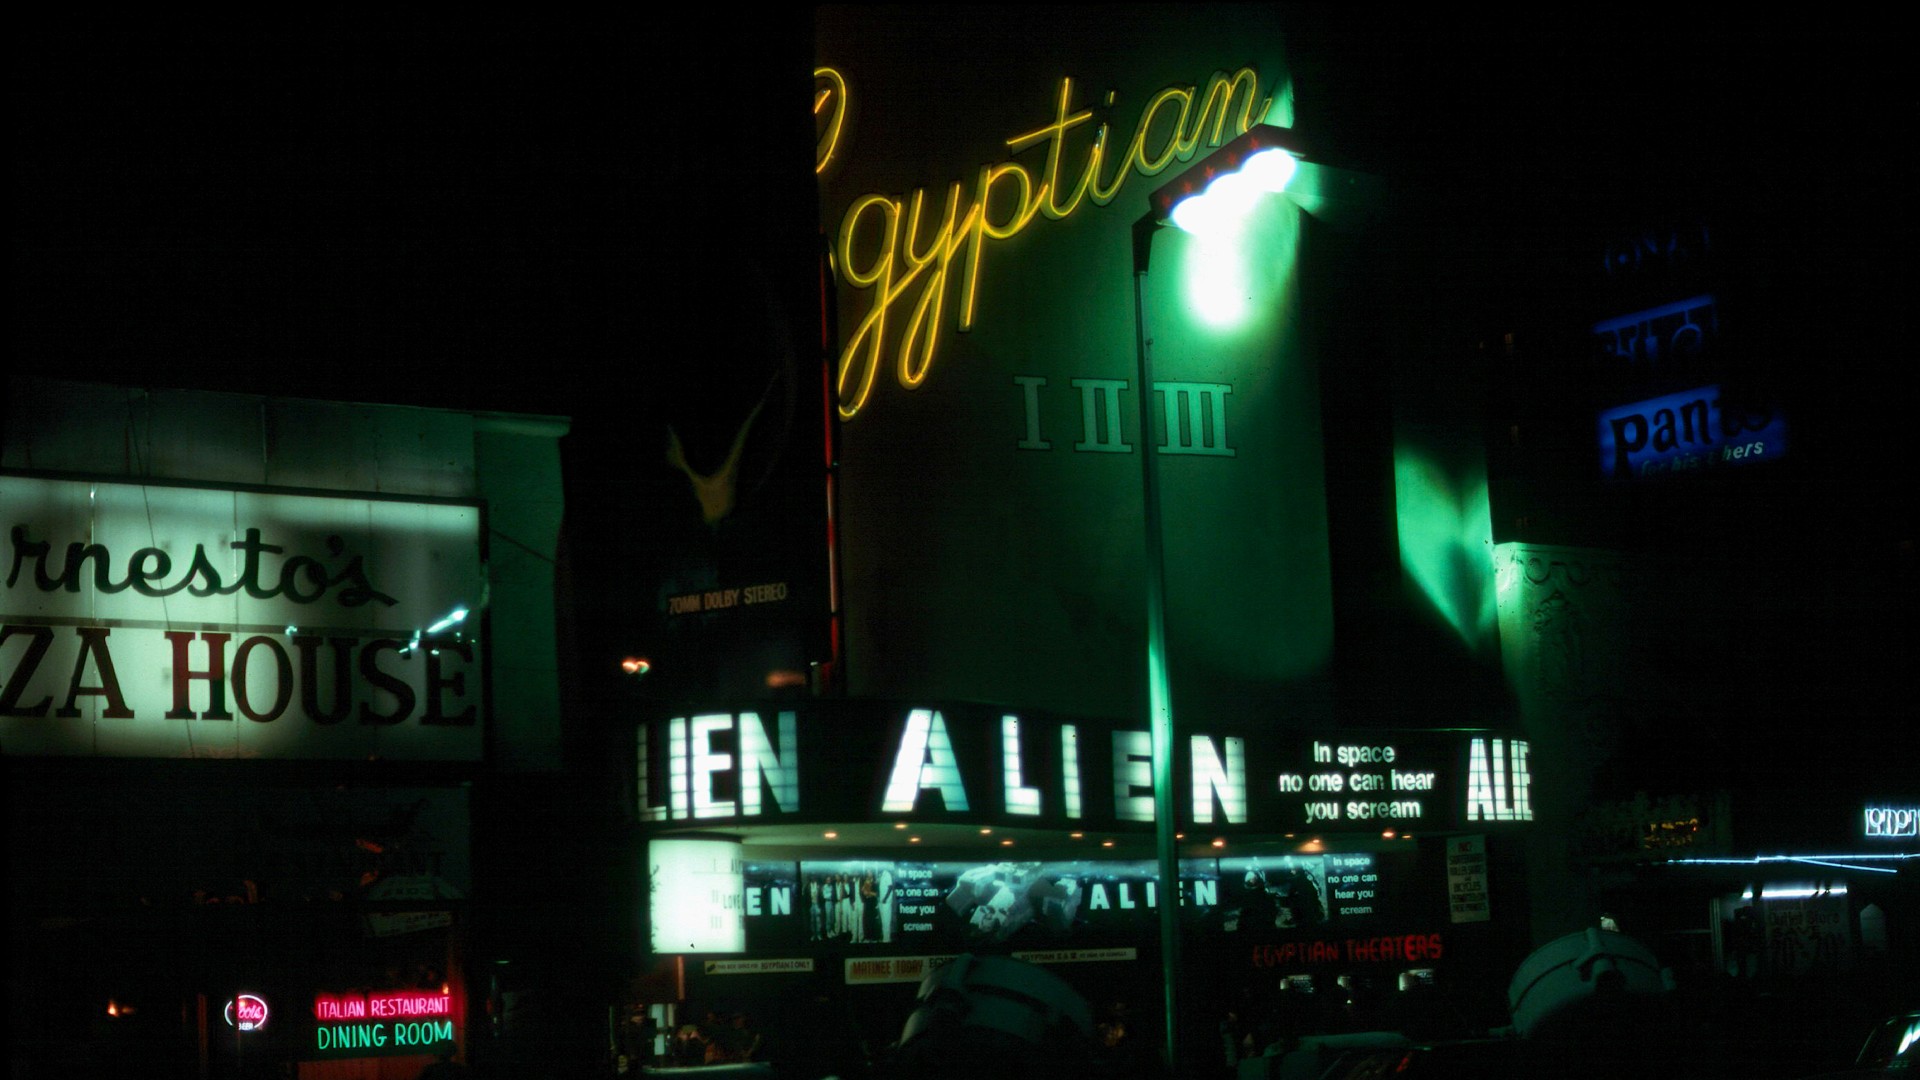 ‘Alien’ heard us all scream 45 years ago today. Here’s what it was like on opening day Space